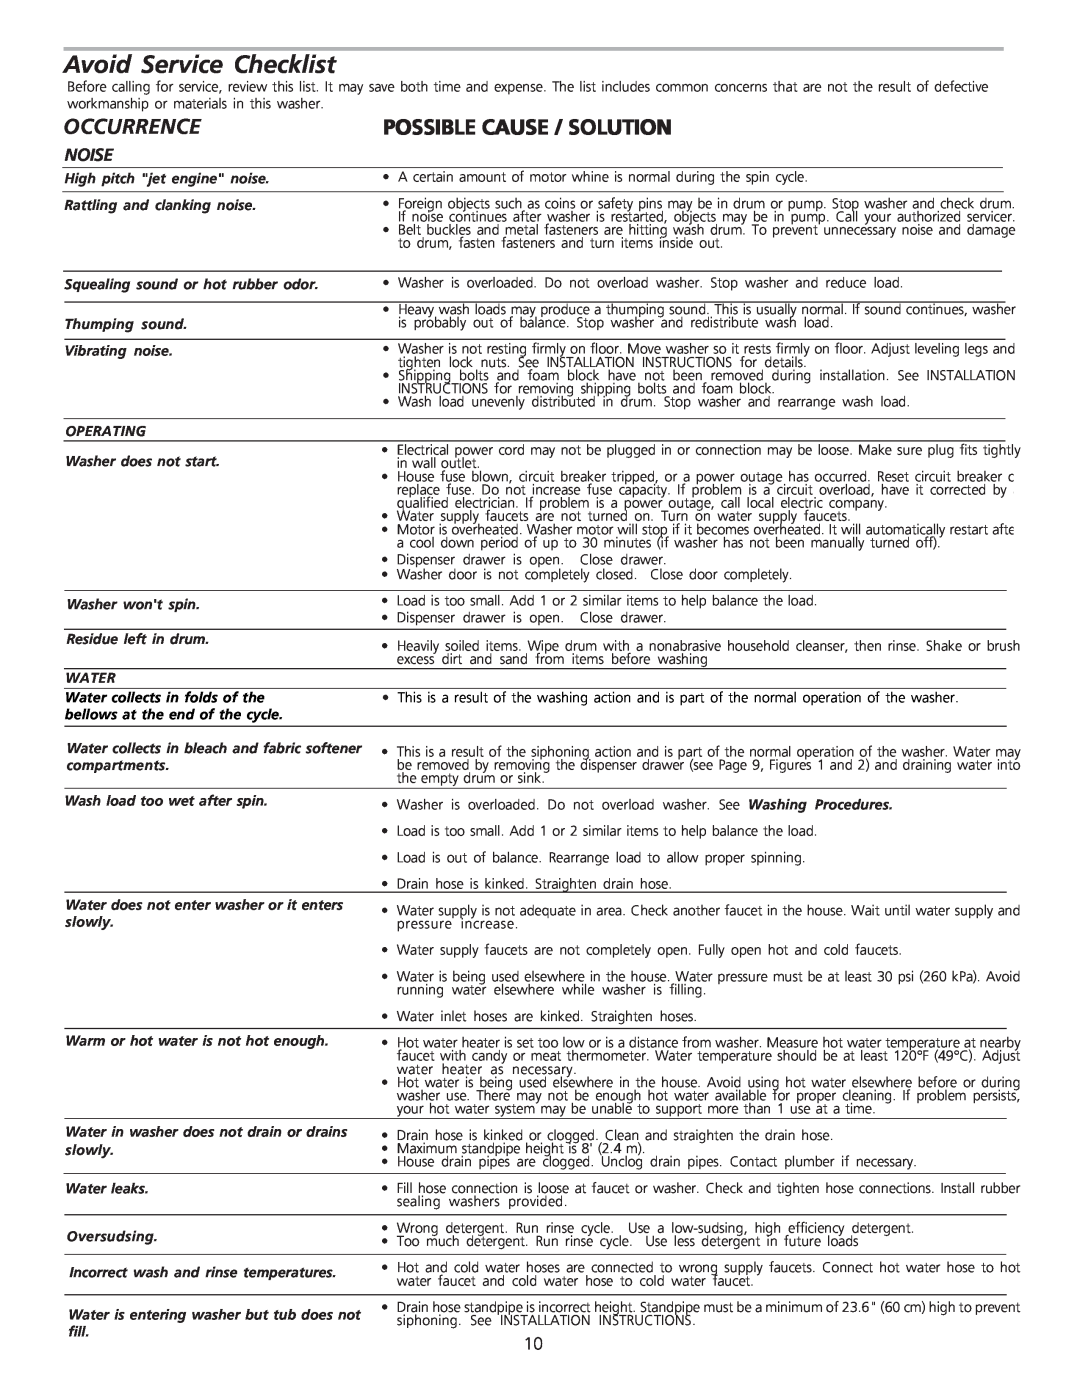 Frigidaire 134922600 manual Avoid Service Checklist, Occurrence, Noise, Possible Cause / Solution 